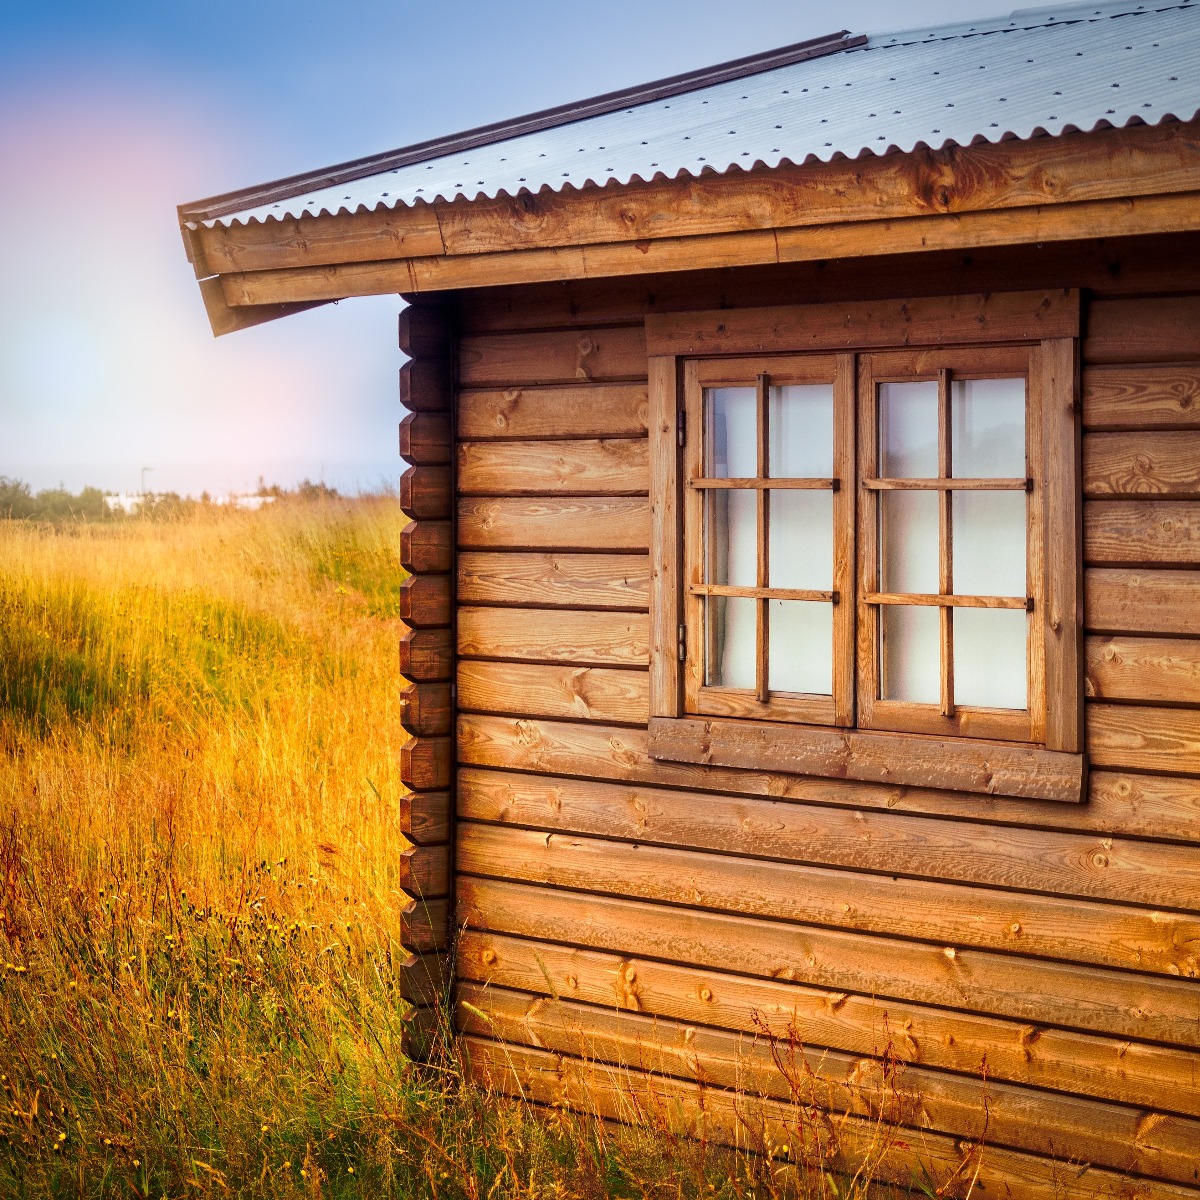 Do I need planning permission for a log cabin?